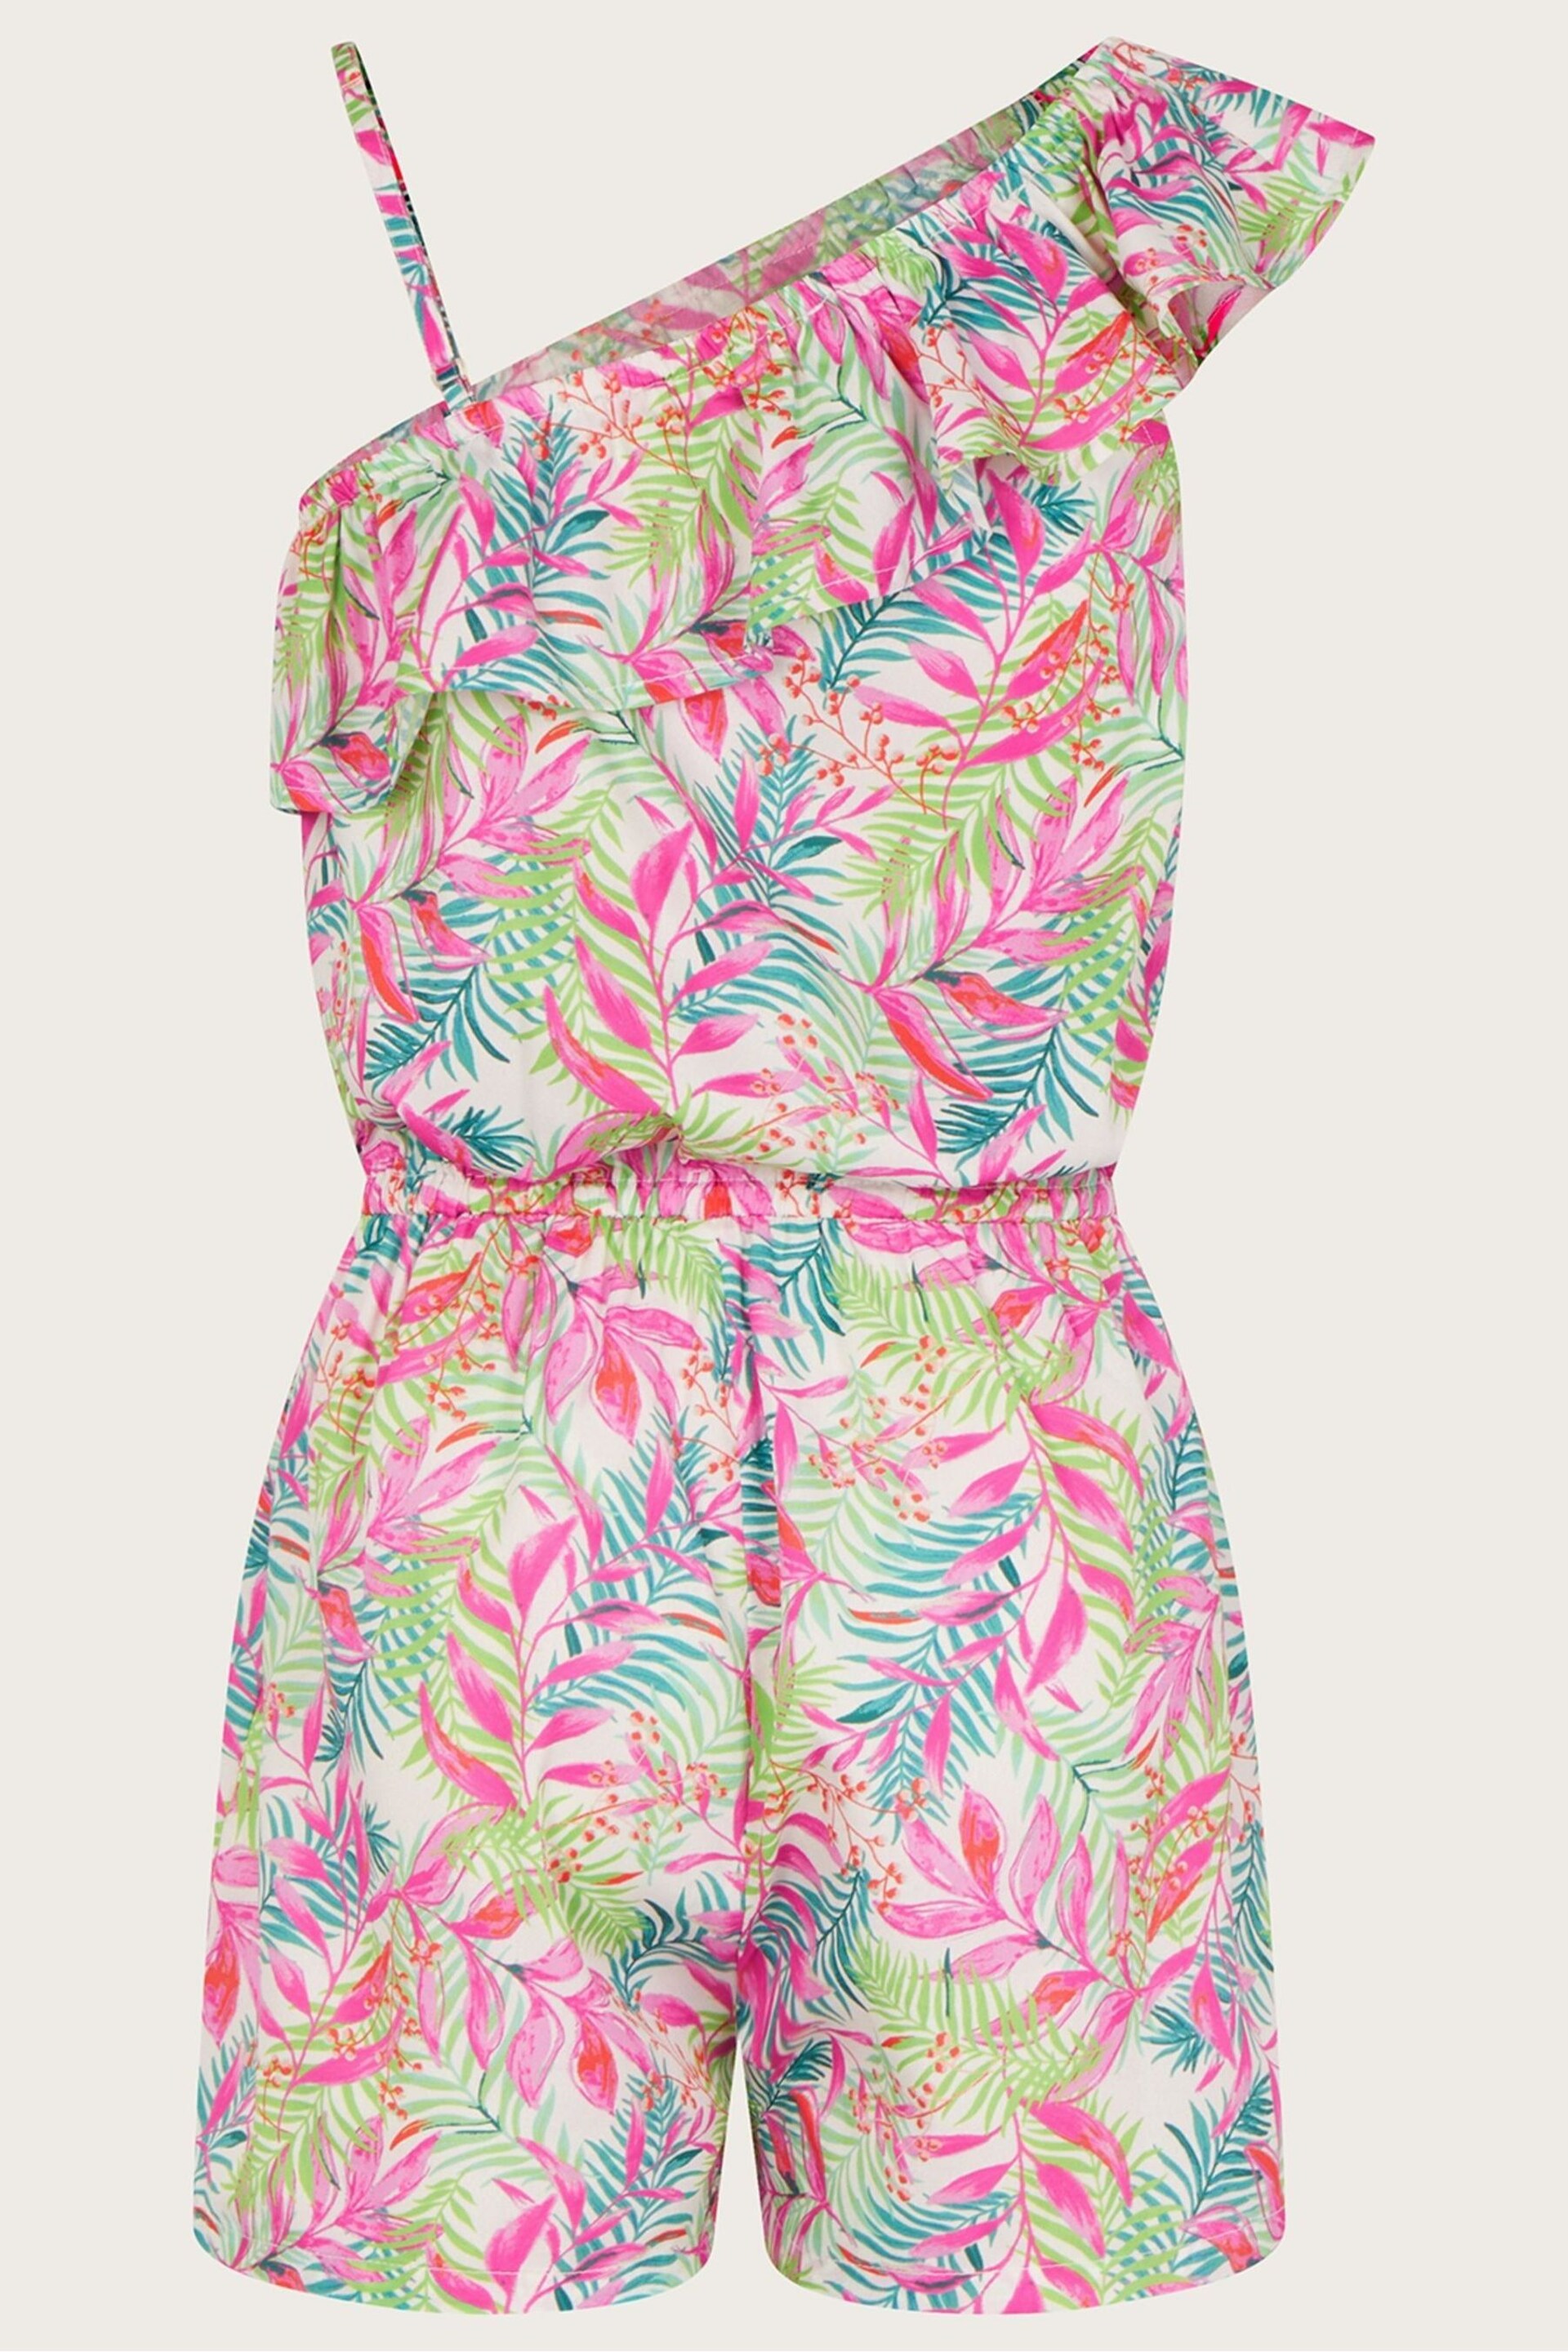 Monsoon Natural Pretty Palm Print One-Shoulder Playsuit - Image 2 of 2